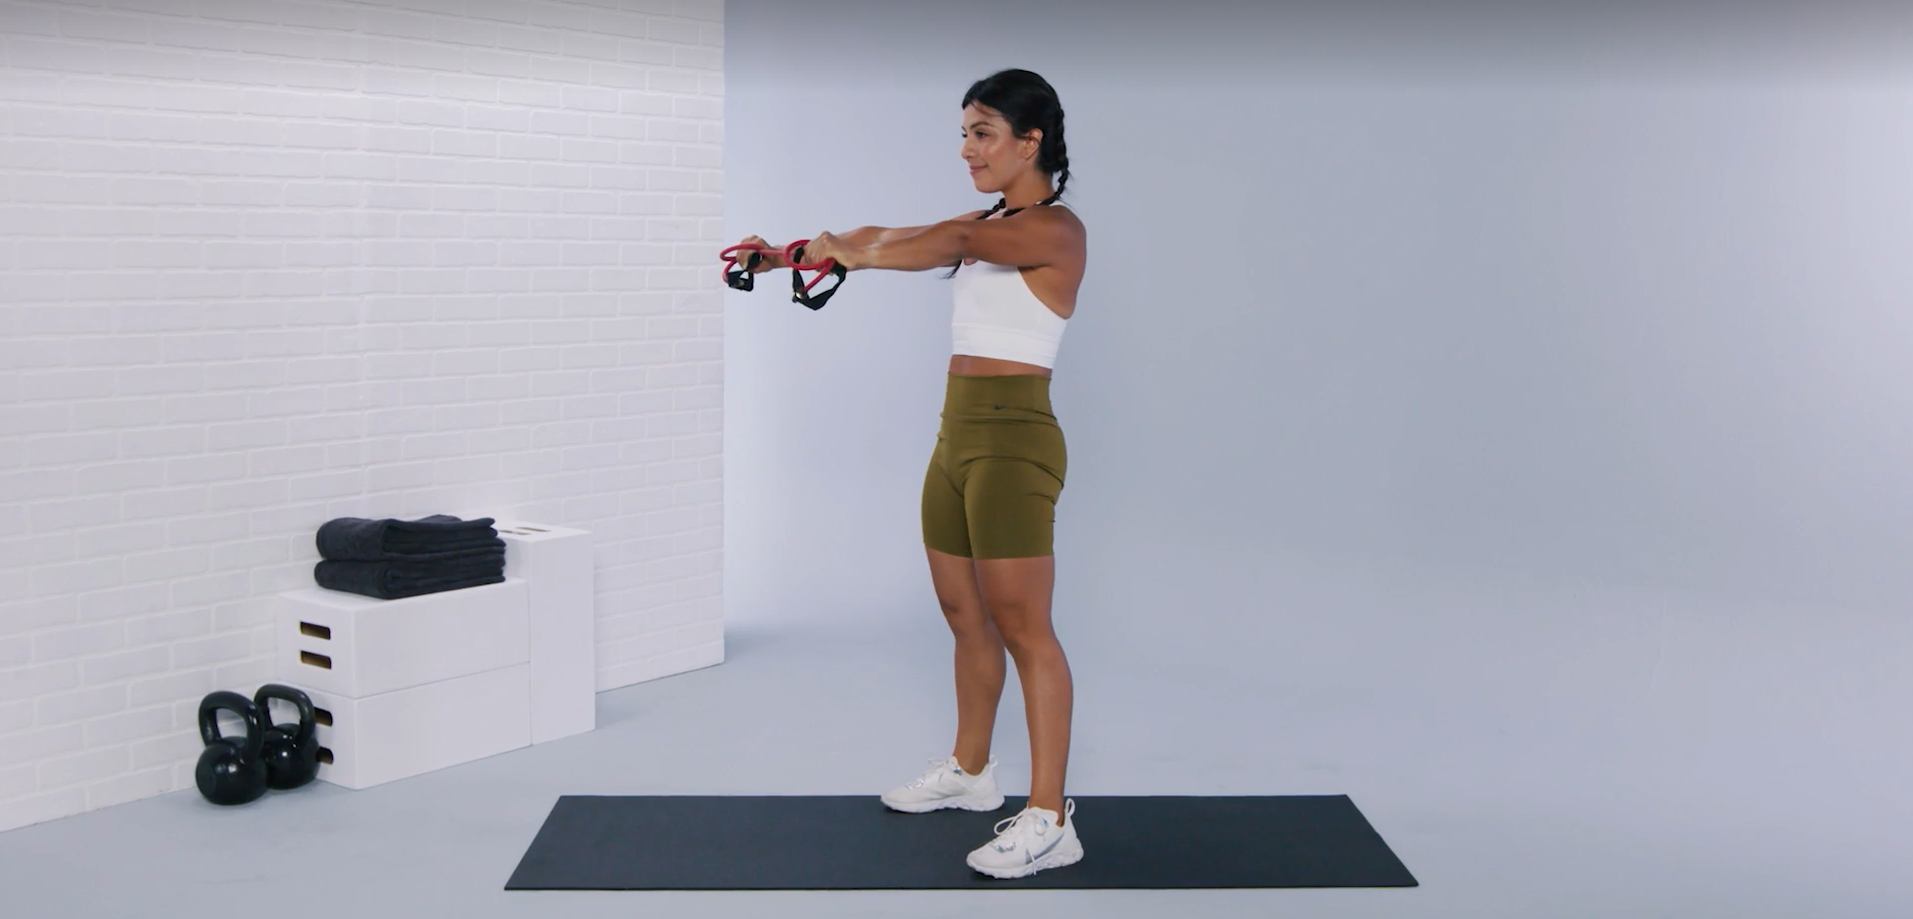 EVO Gym Total-Body Resistance Training System: A Portable